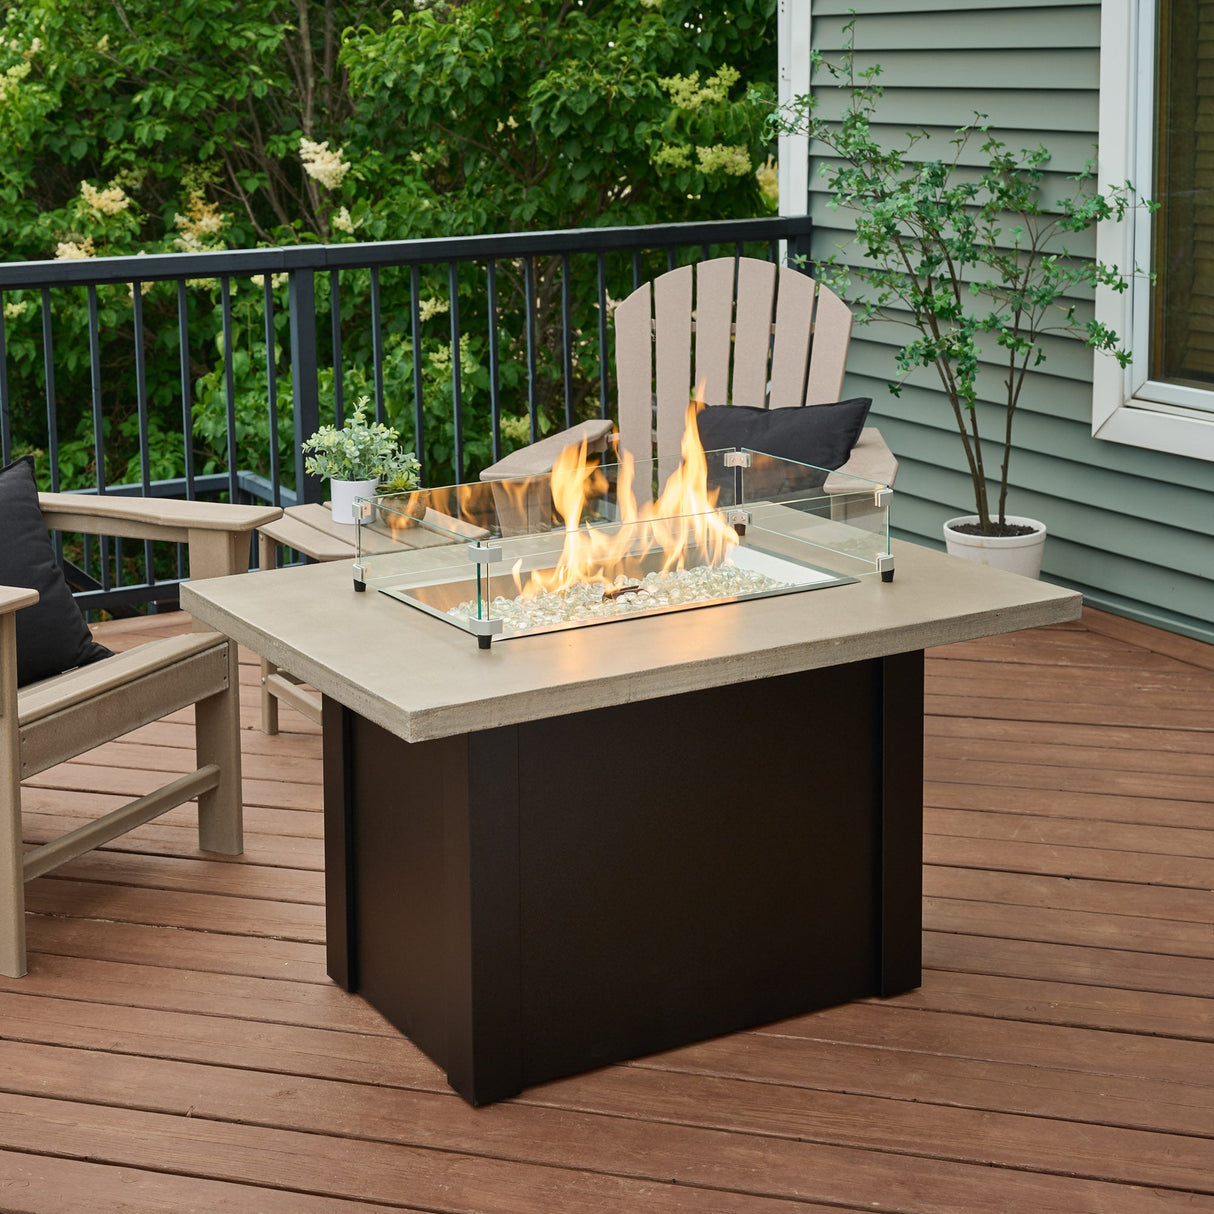 The Havenwood Rectangular Gas Fire Pit Table with a Pebble Grey top and Luverne Black base in an outdoor space with a glass wind guard on its top